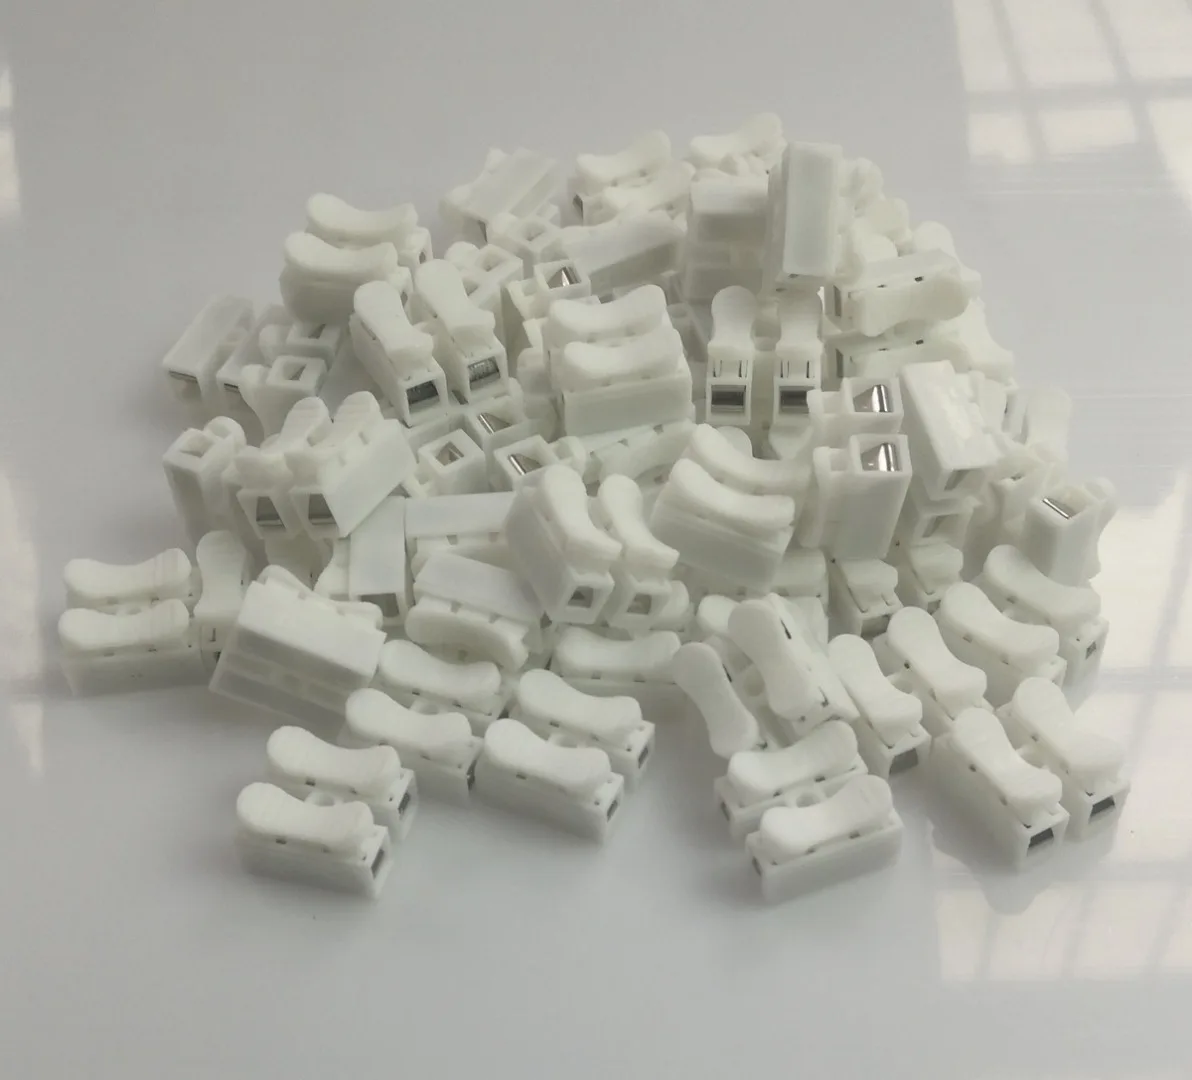 30pcs High-quality New Electrical 2Pins Cable Connectors CH2 Quick Splice Lock Wire Terminals